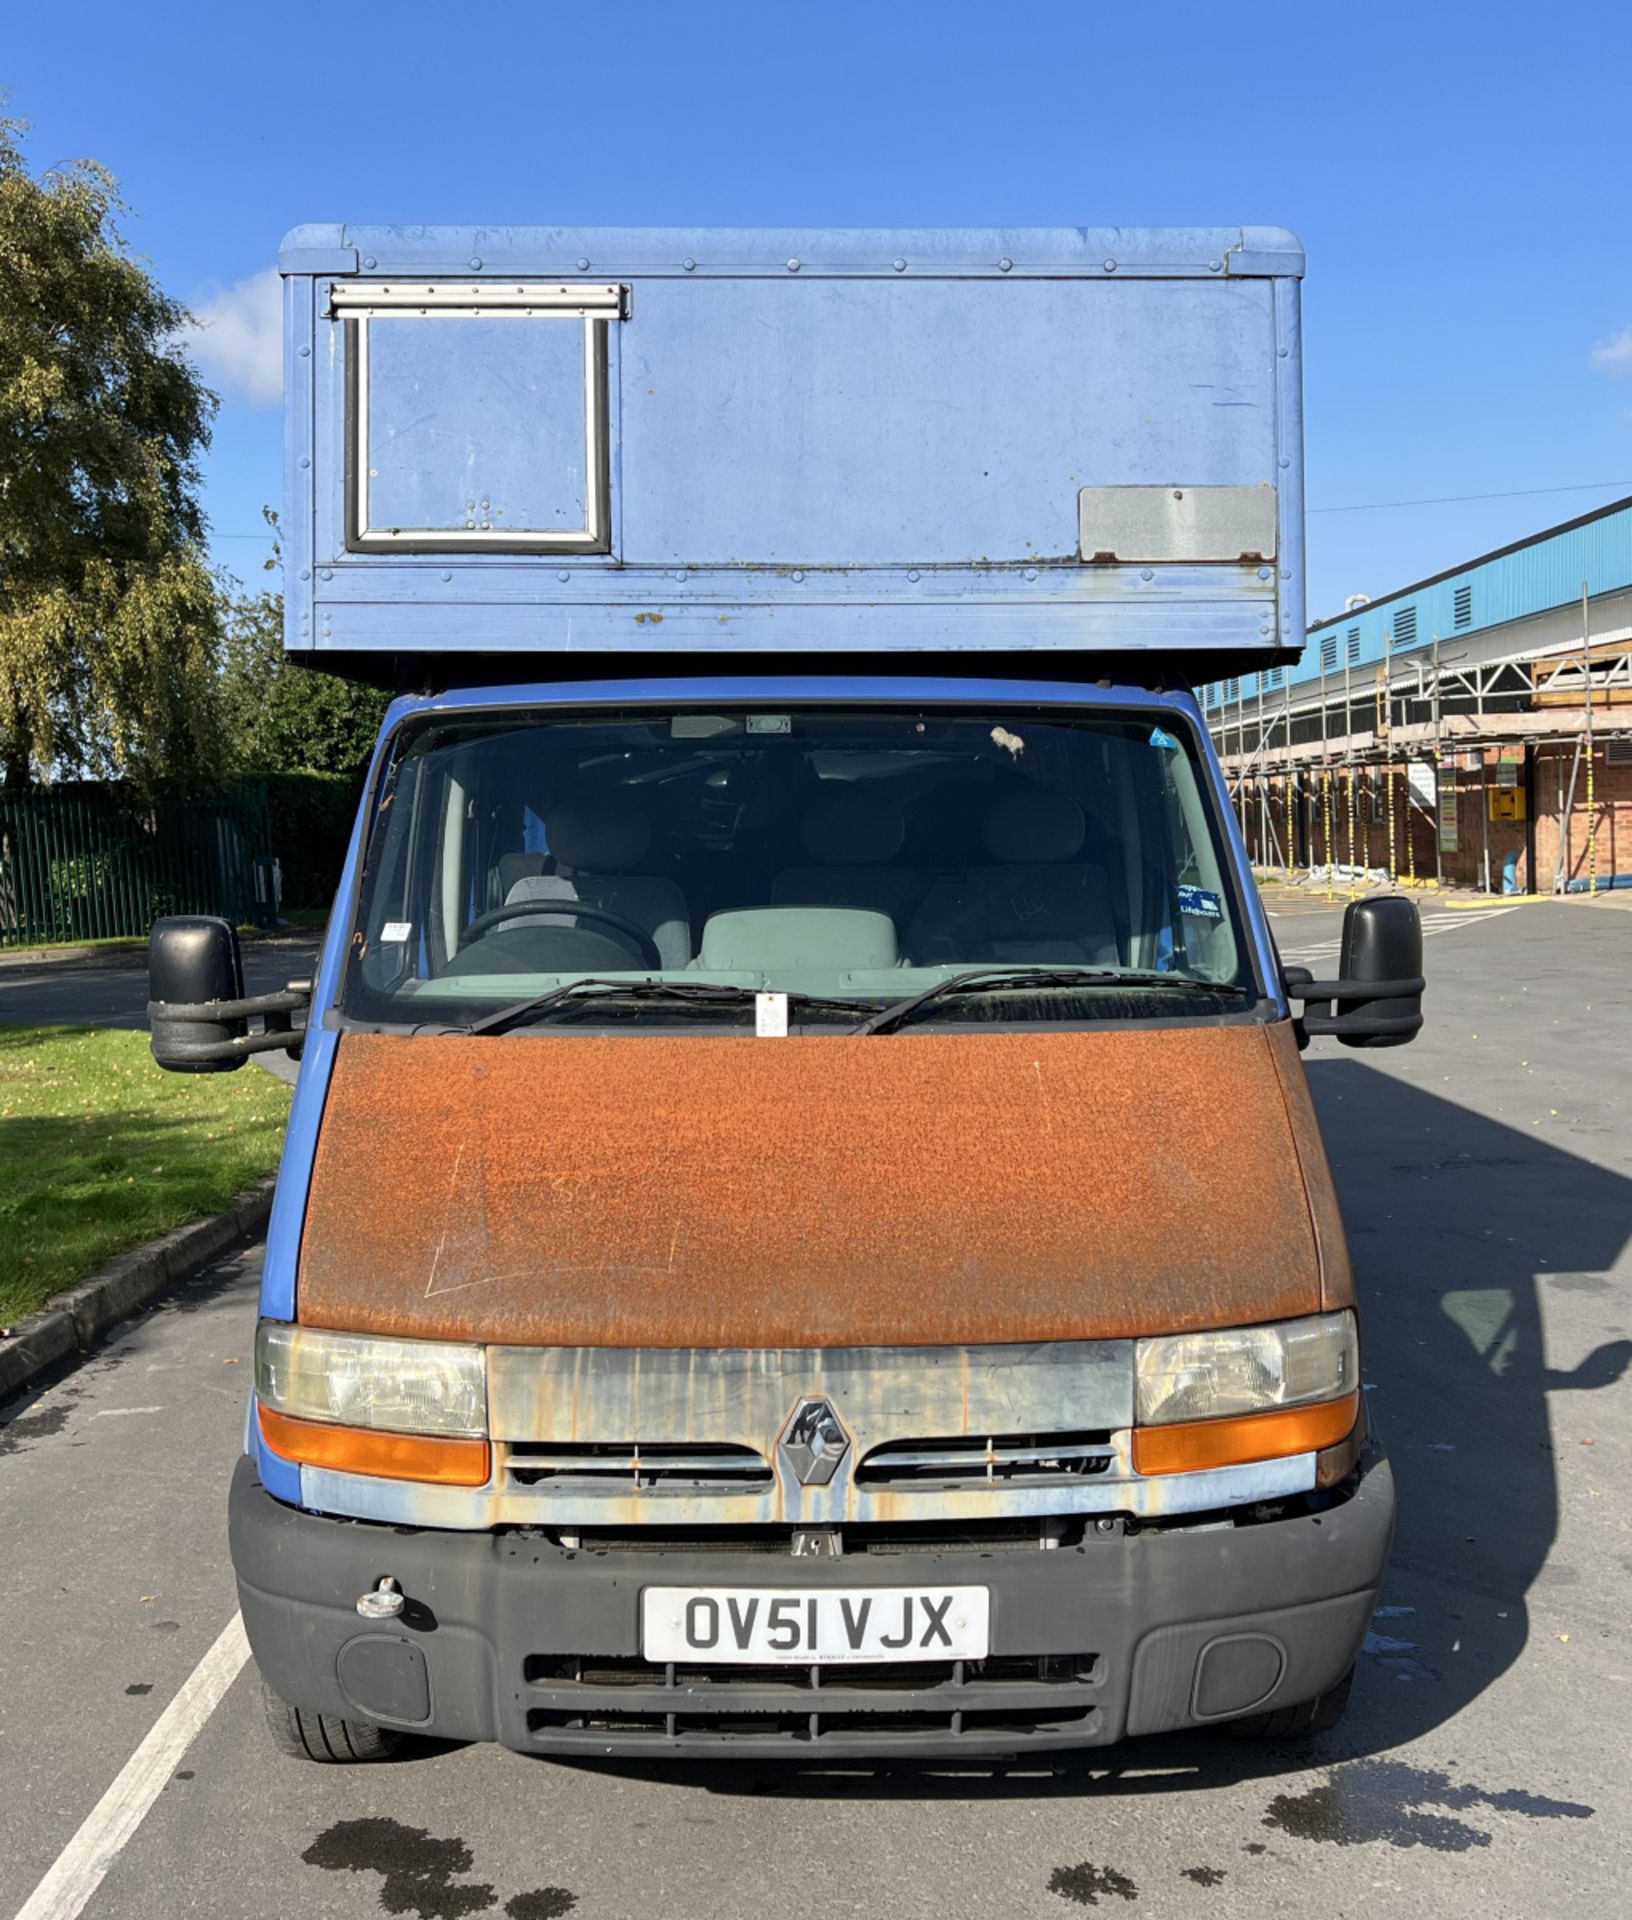 Renault Master LL35 DCI crew-cab Luton van with tail lift - 2.2L - diesel - MOT expired (see desc.) - Image 5 of 25